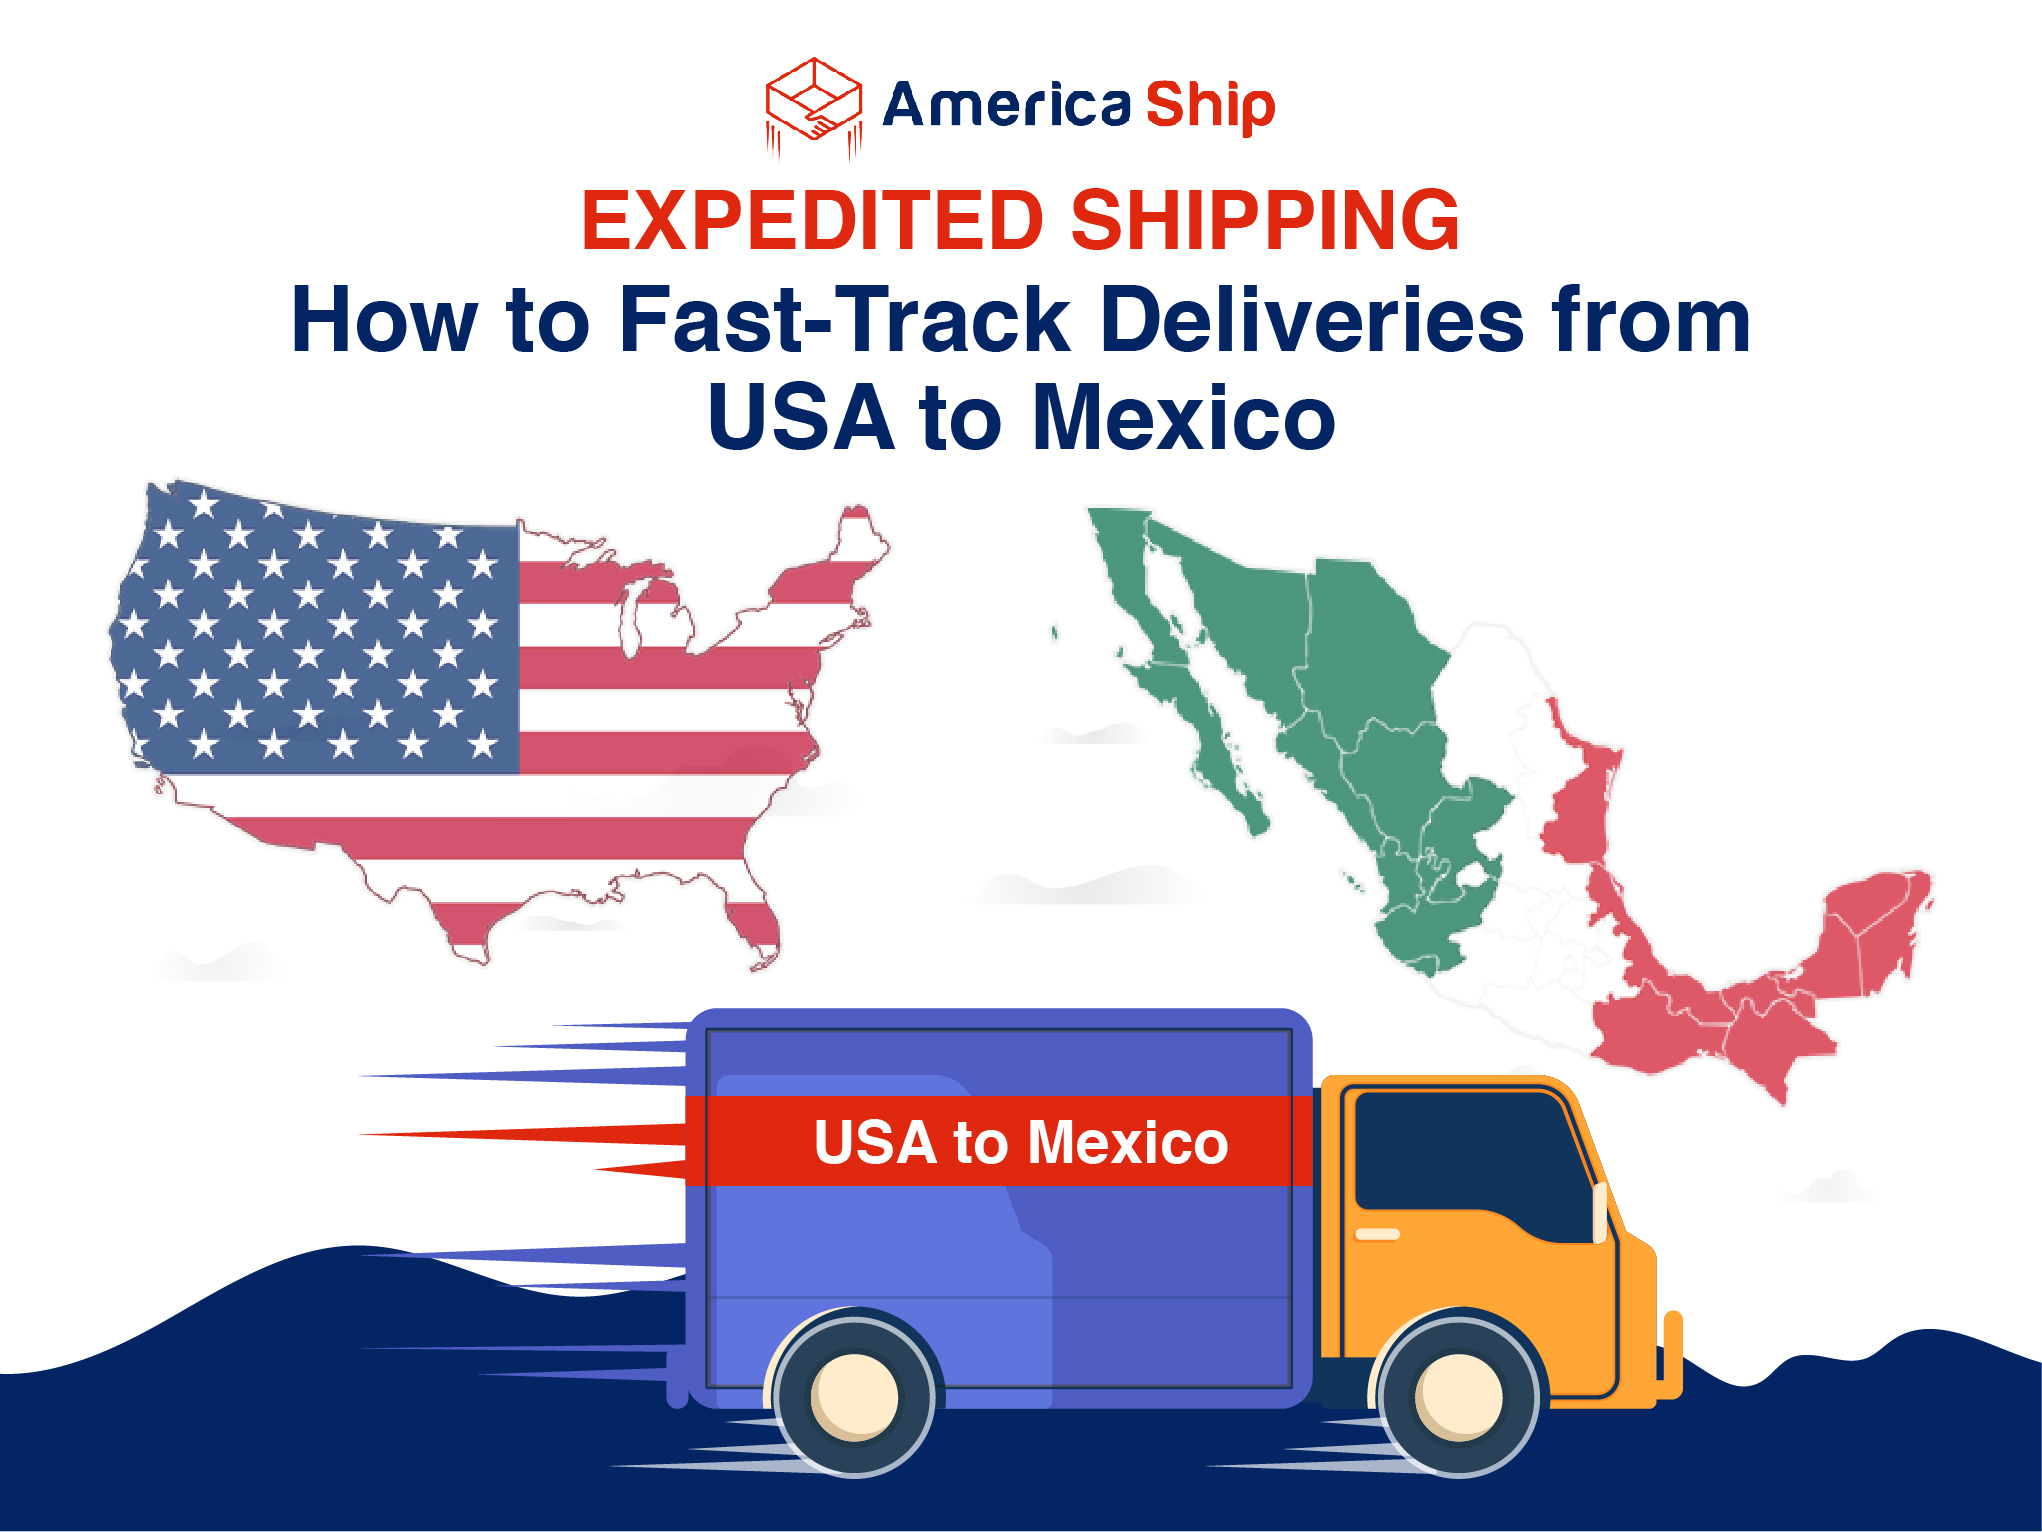 Expedited Shipping: Fast-Tracking Deliveries from USA to Mexico with America Ship